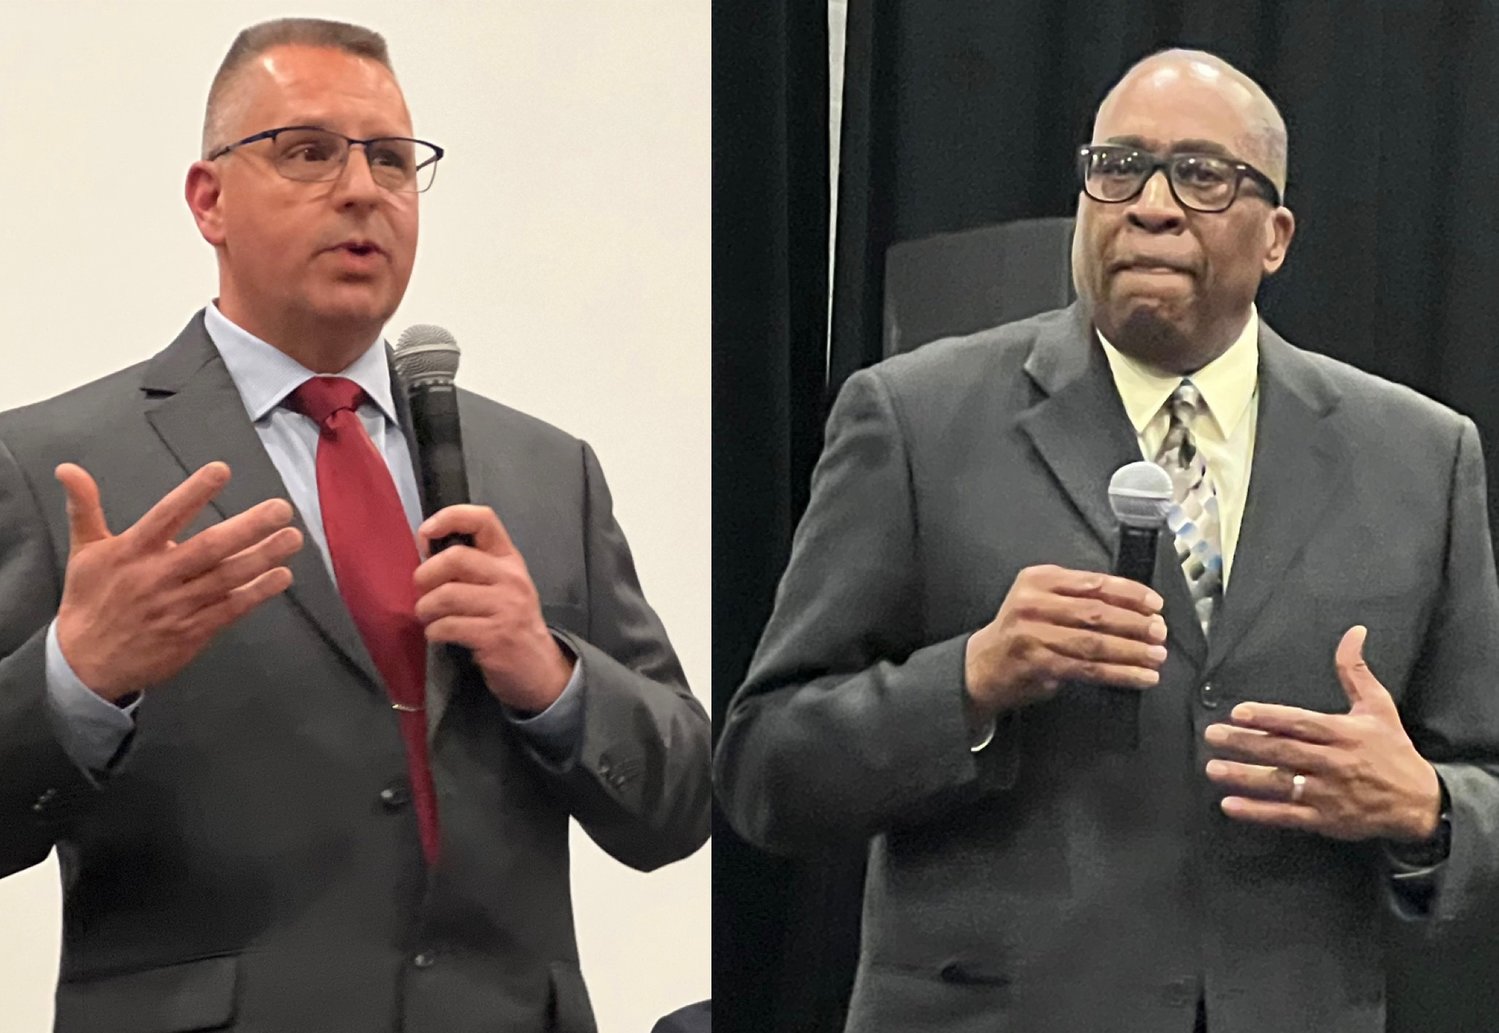 Edwin Miller (left) and Brian Sturdivant spoke at a forum on Tuesday.